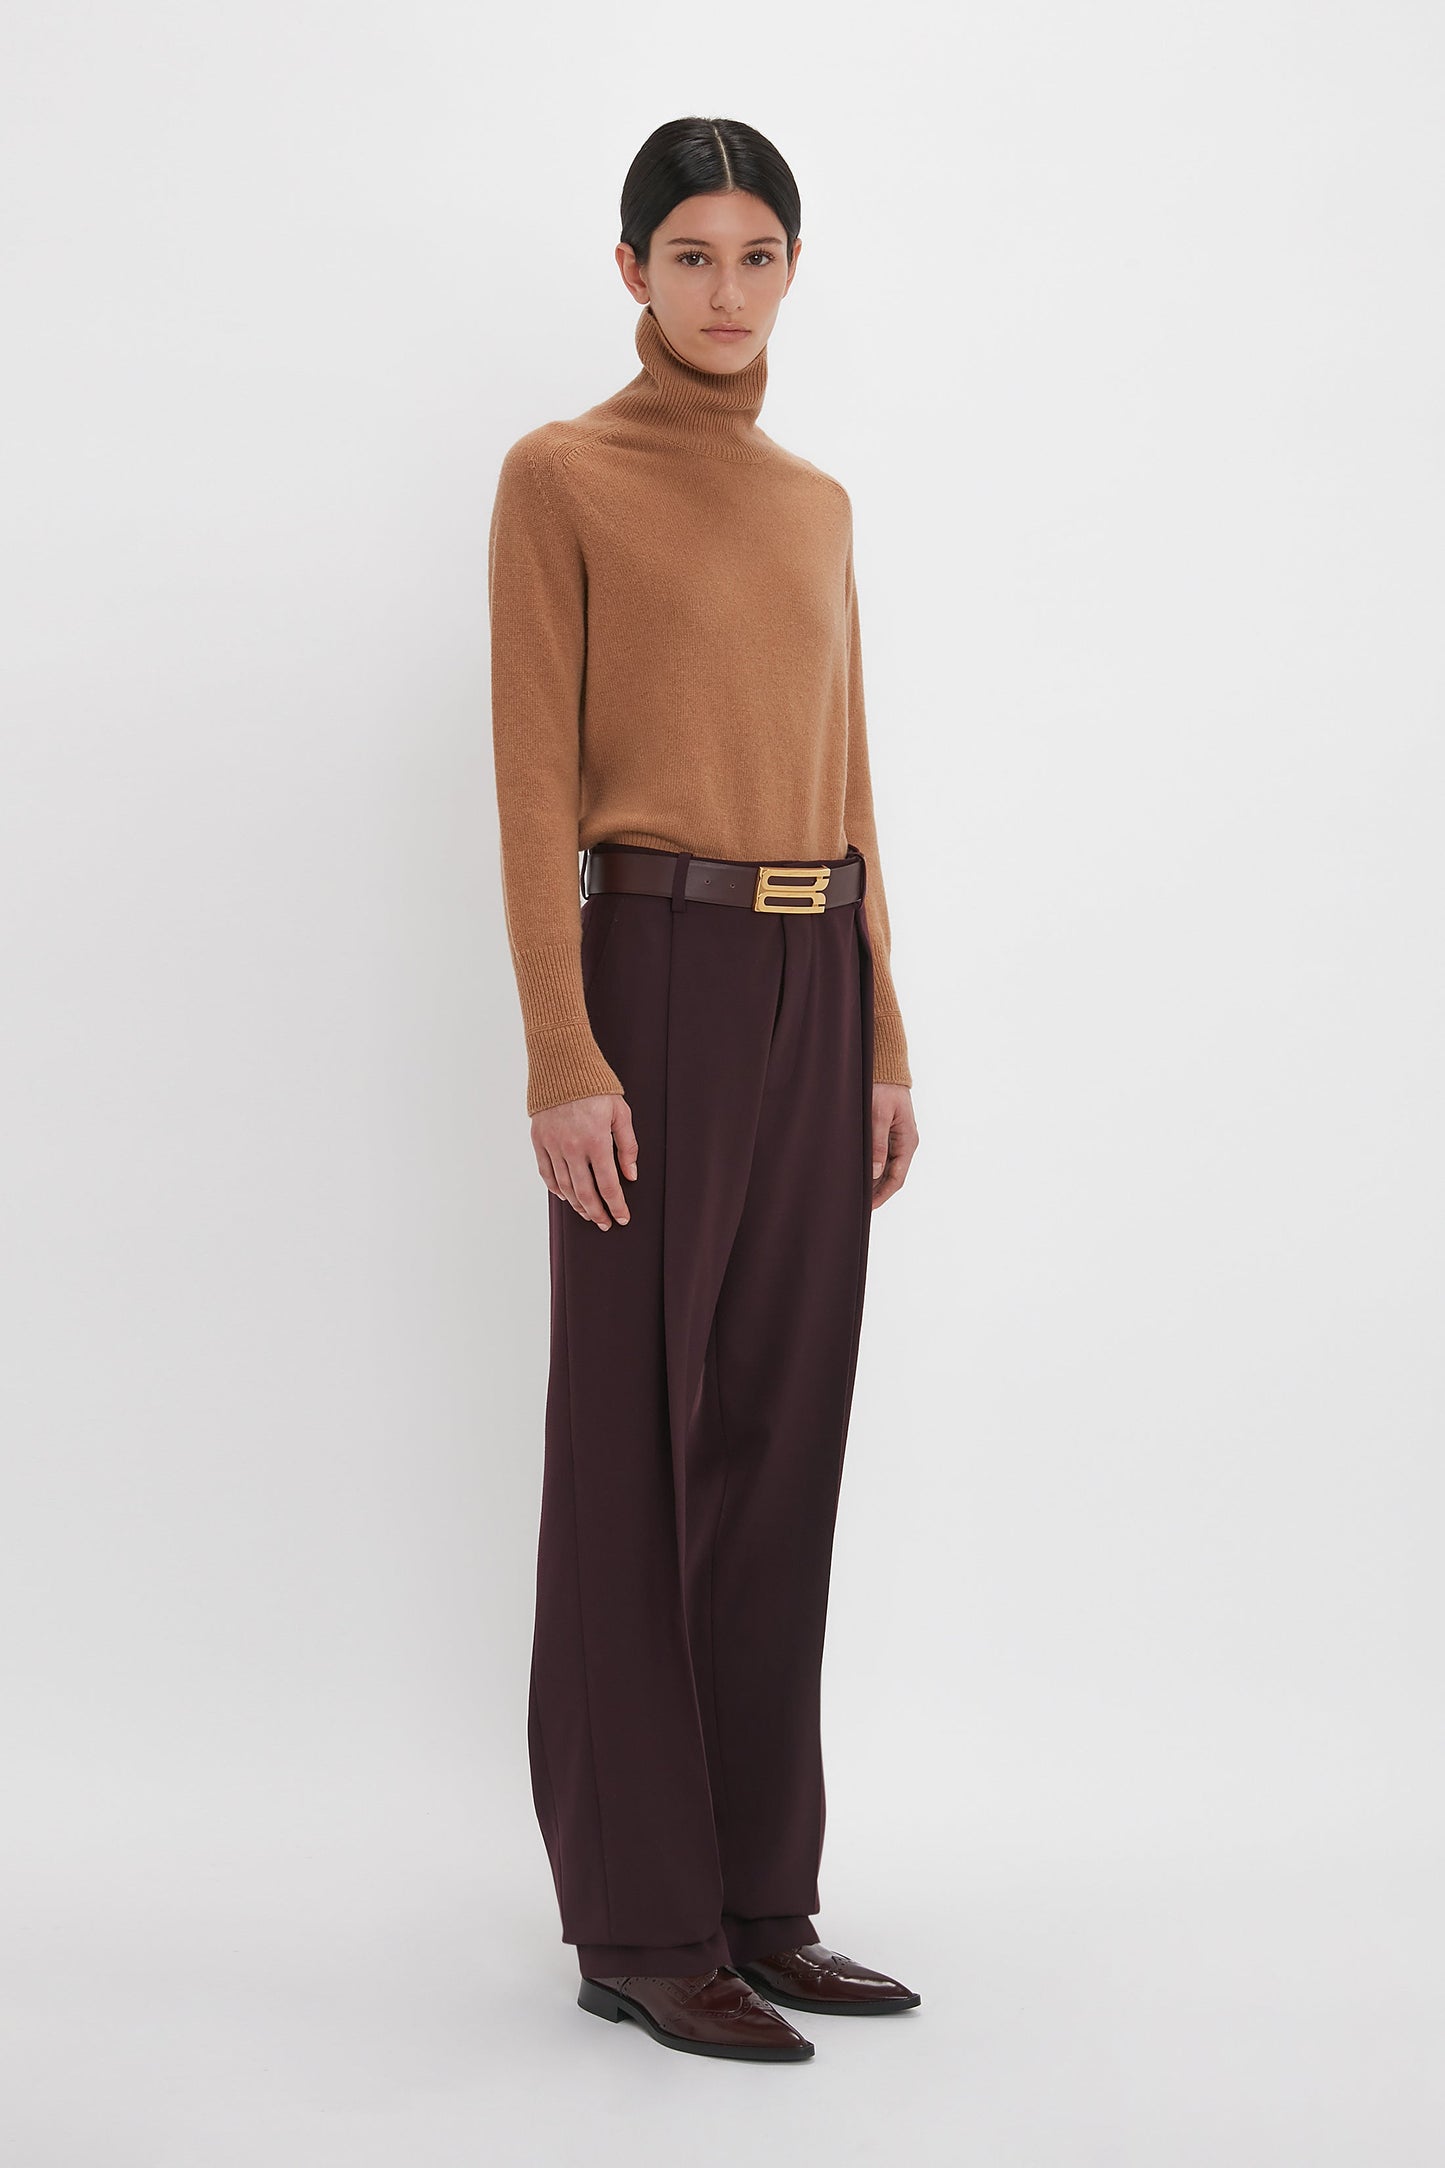 A person with short hair stands wearing a brown turtleneck sweater, Victoria Beckham Asymmetric Chino Trouser in Deep Mahogany, a black belt with a gold buckle, and brown shoes, against a plain white background.